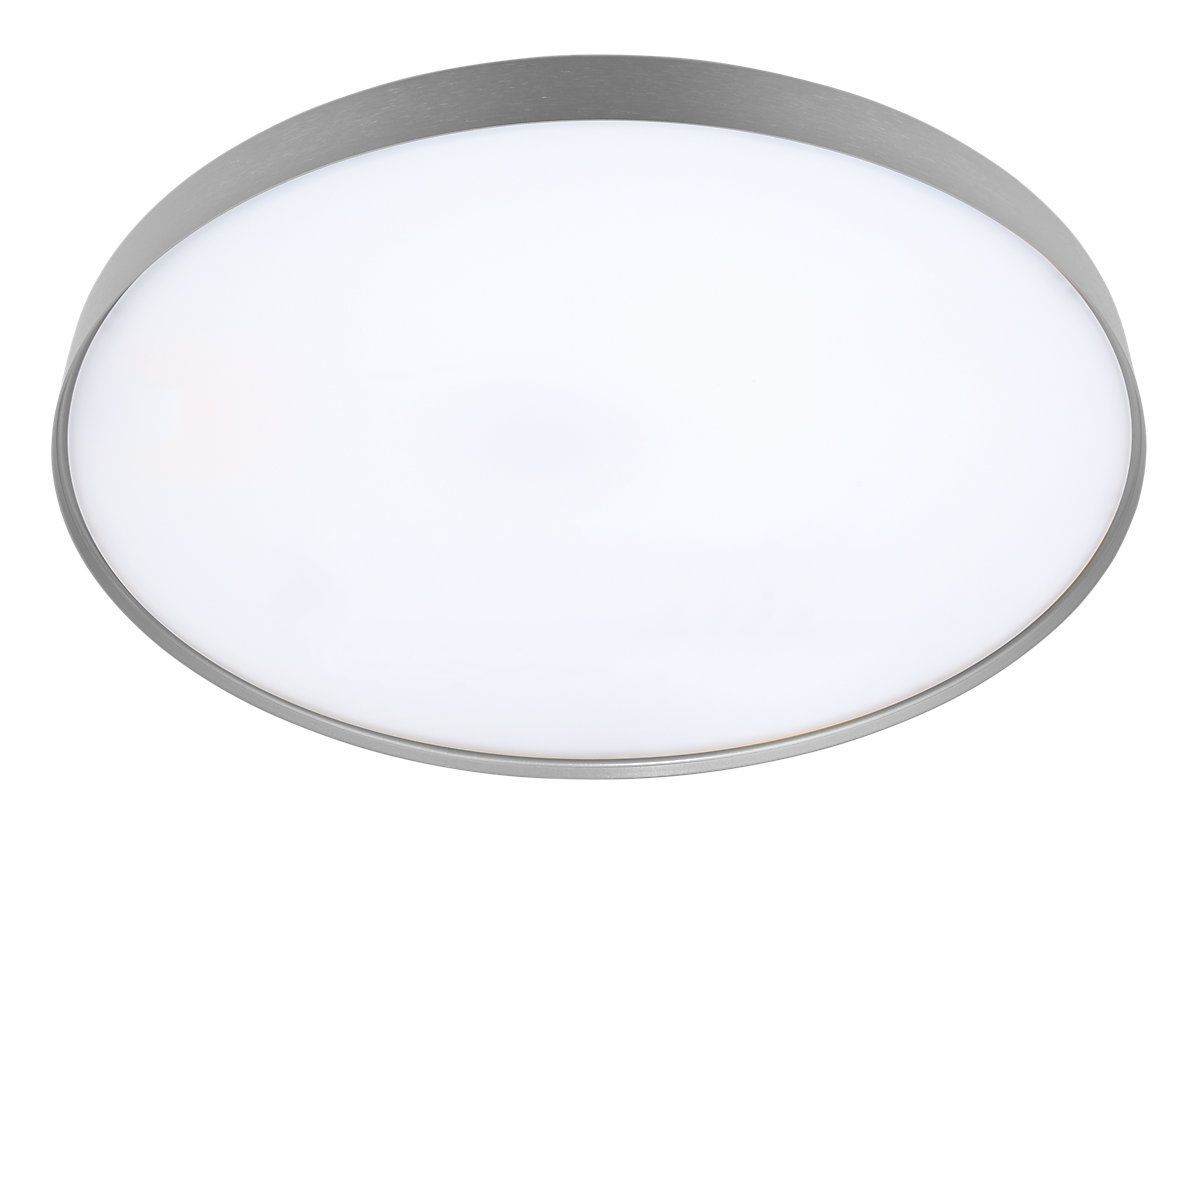 Overhead lamp Compendium Plate by Luceplan